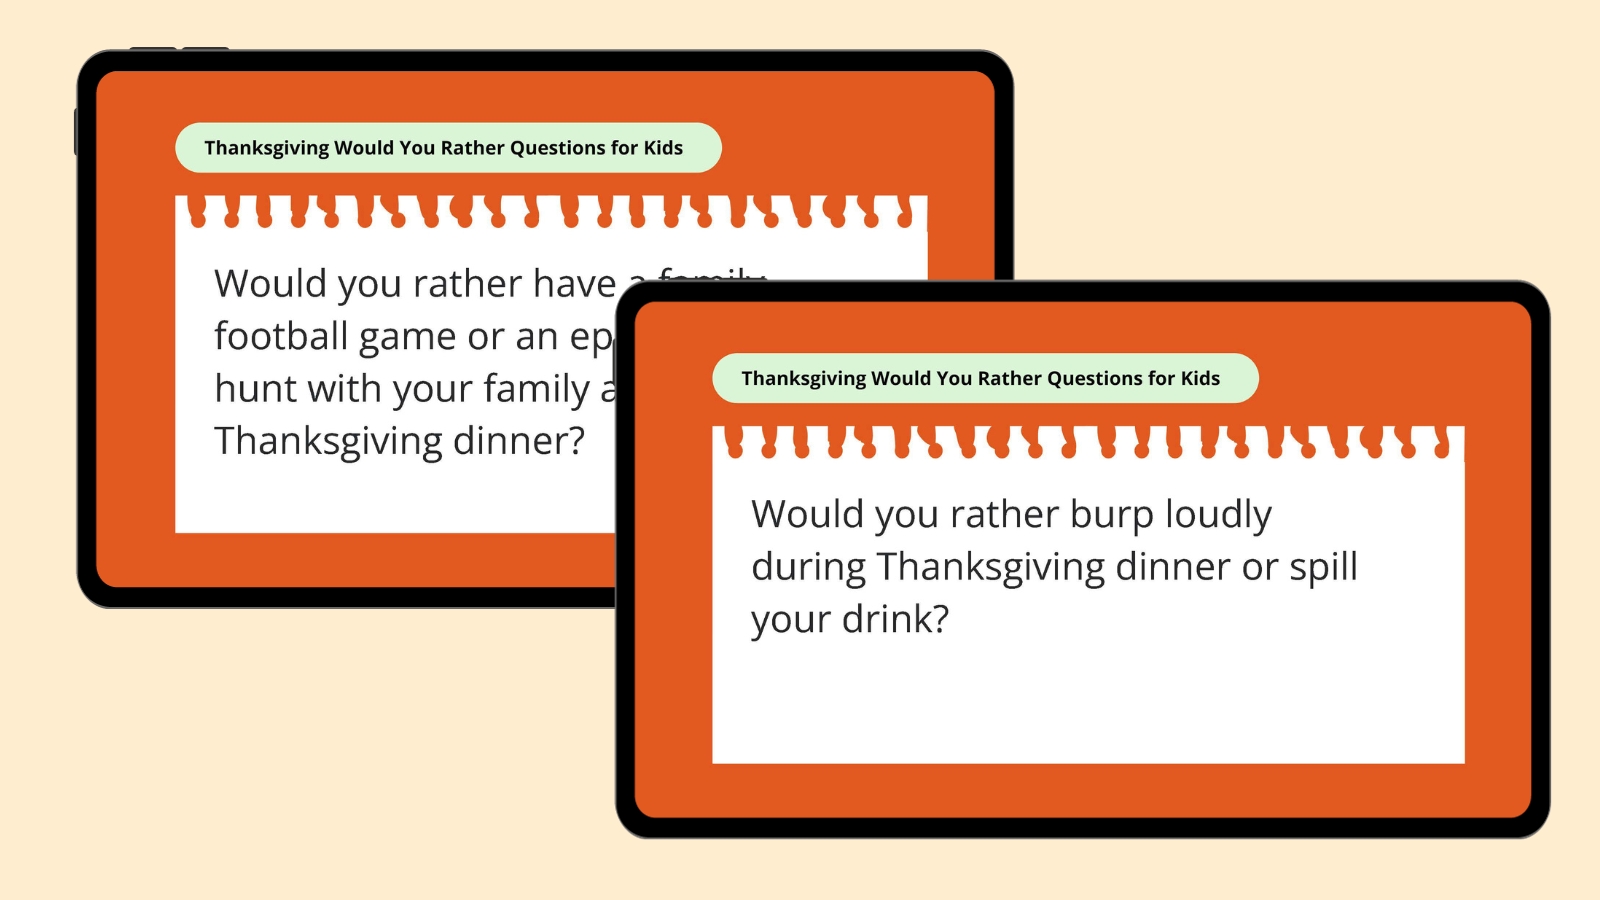 Would you rather burp loudly during Thanksgiving dinner or spill your drink?